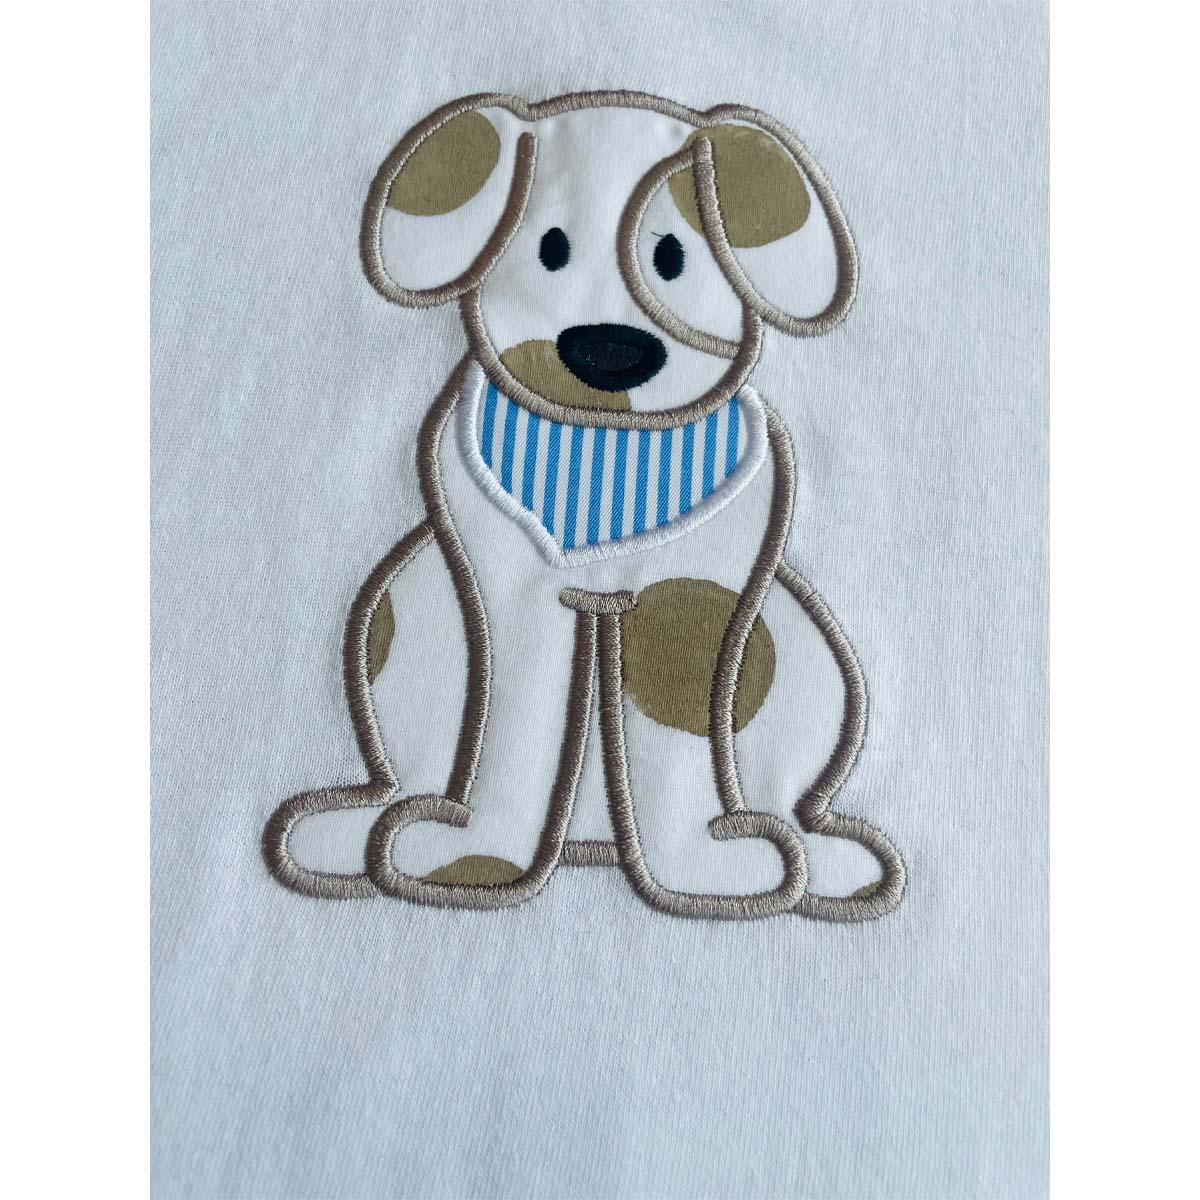 Donald The Dog Tee - Southern Grace Creations